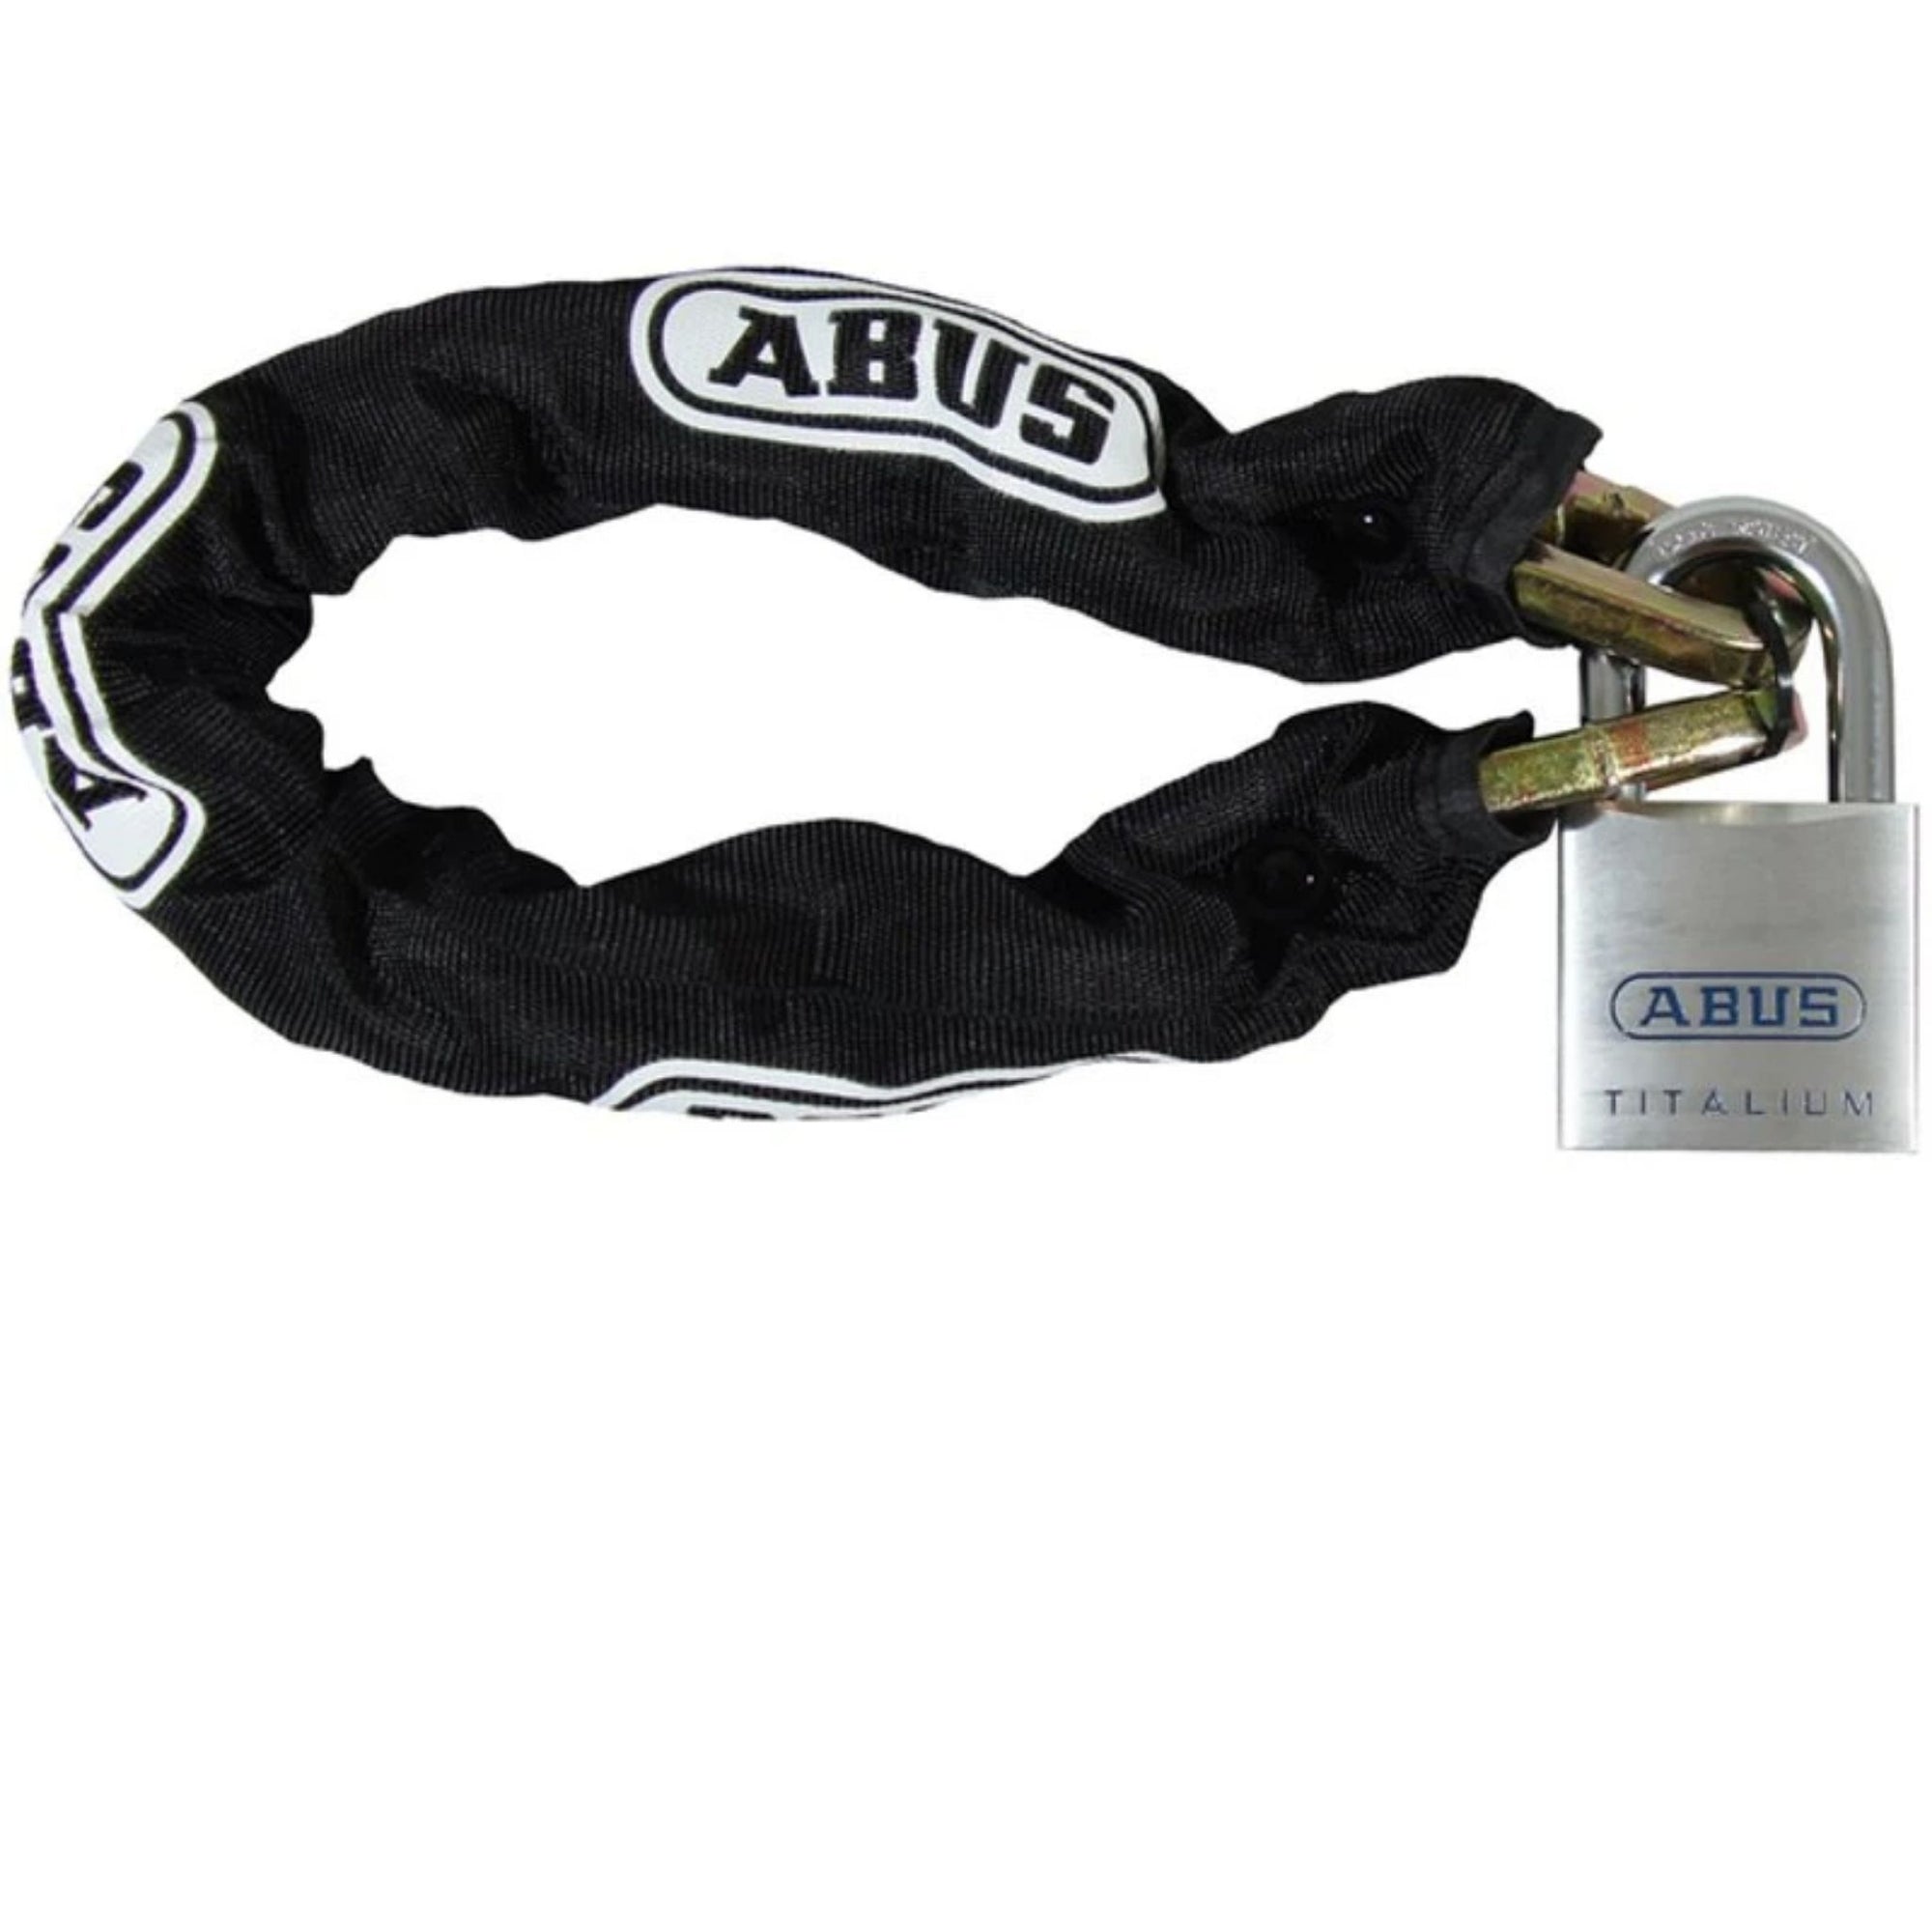 Abus 10KS Chain & Sleeve with 80TI/50 Lock - 2-Foot Pre-Cut Chain with Fitted Nylon Sleeve, 3/8" Thick Security Chains (10KS) with Titanium Padlock Included - The Lock Source